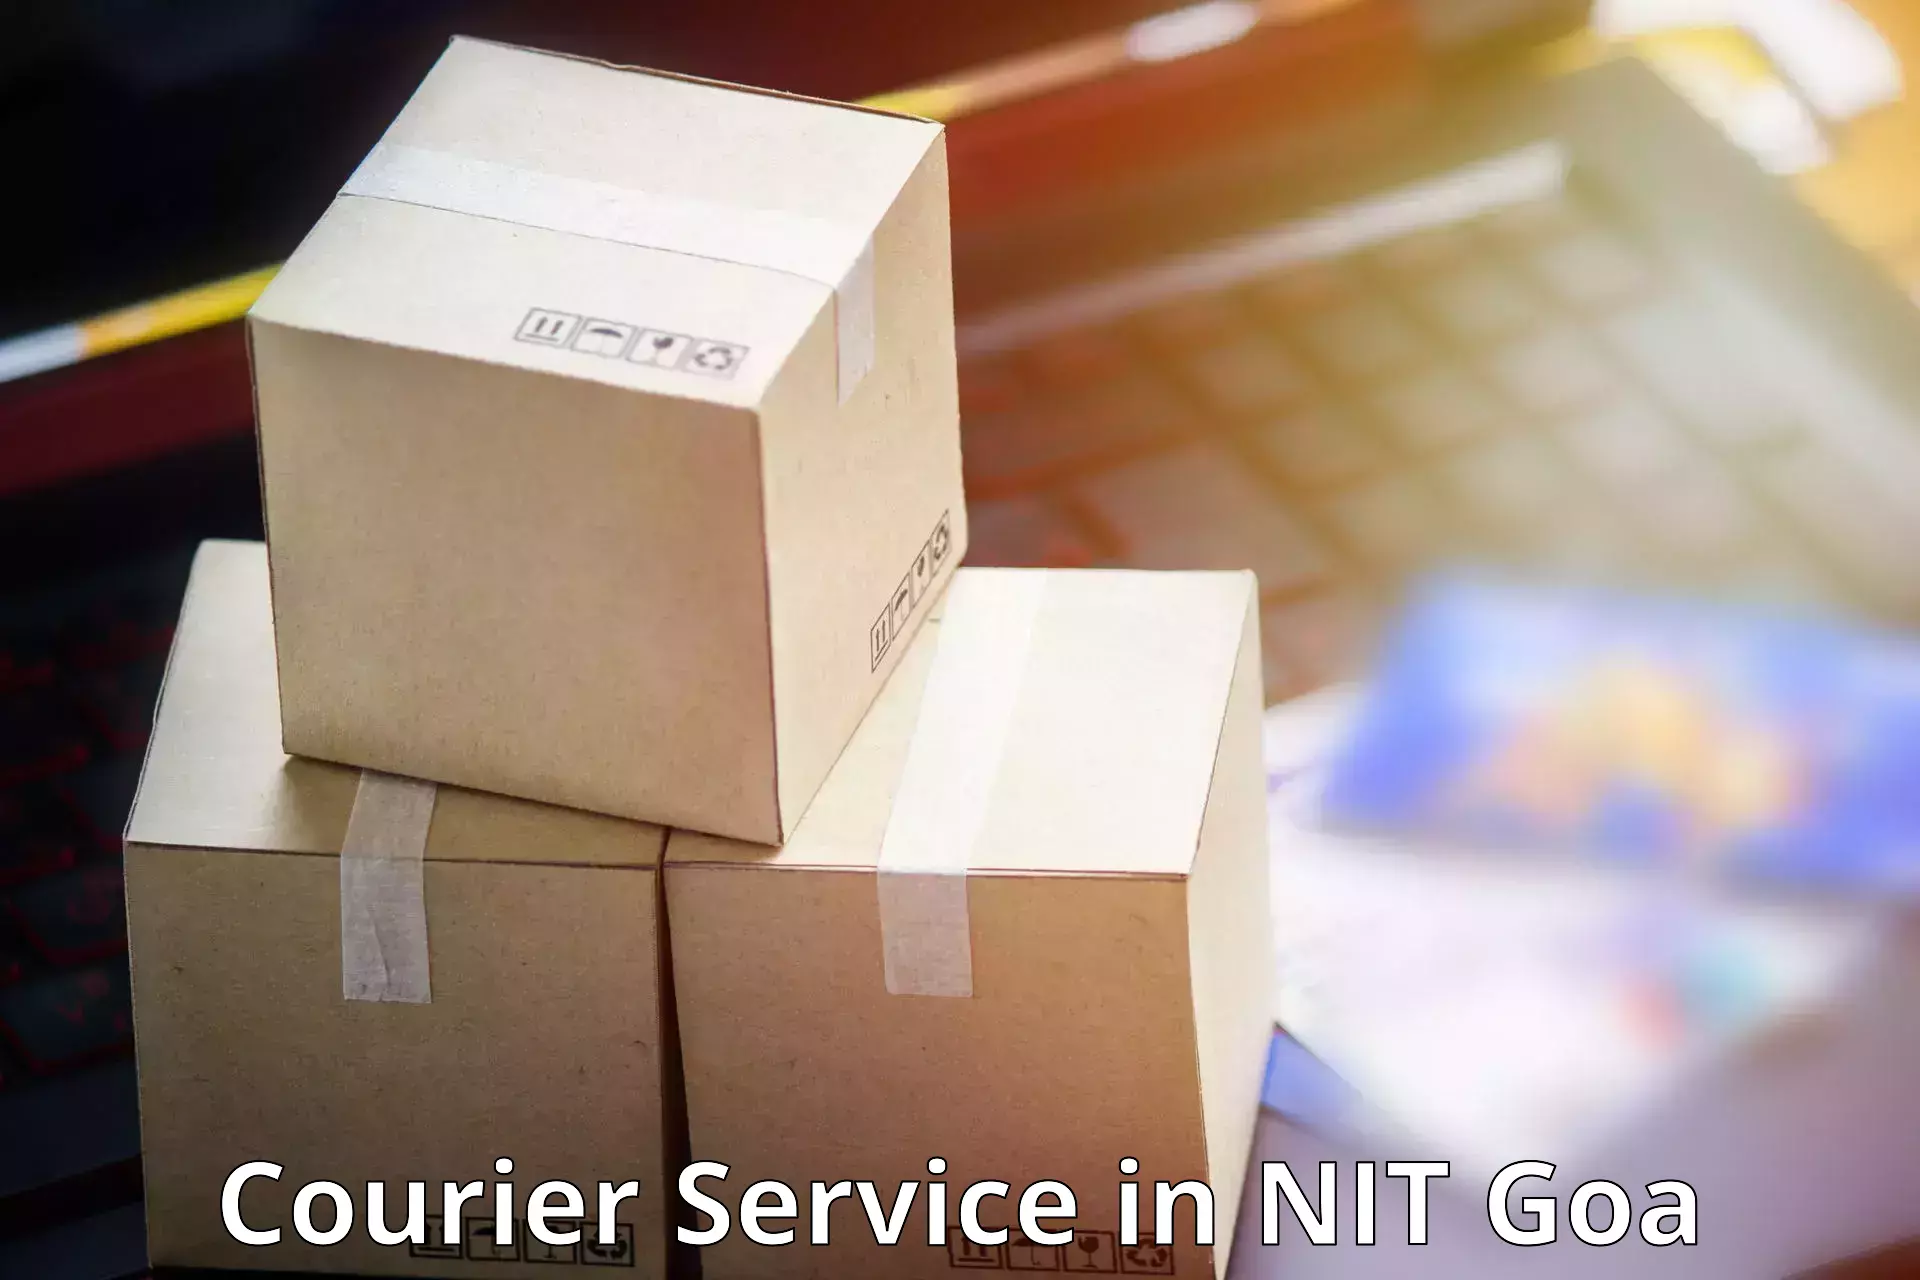 Customer-oriented courier services in NIT Goa